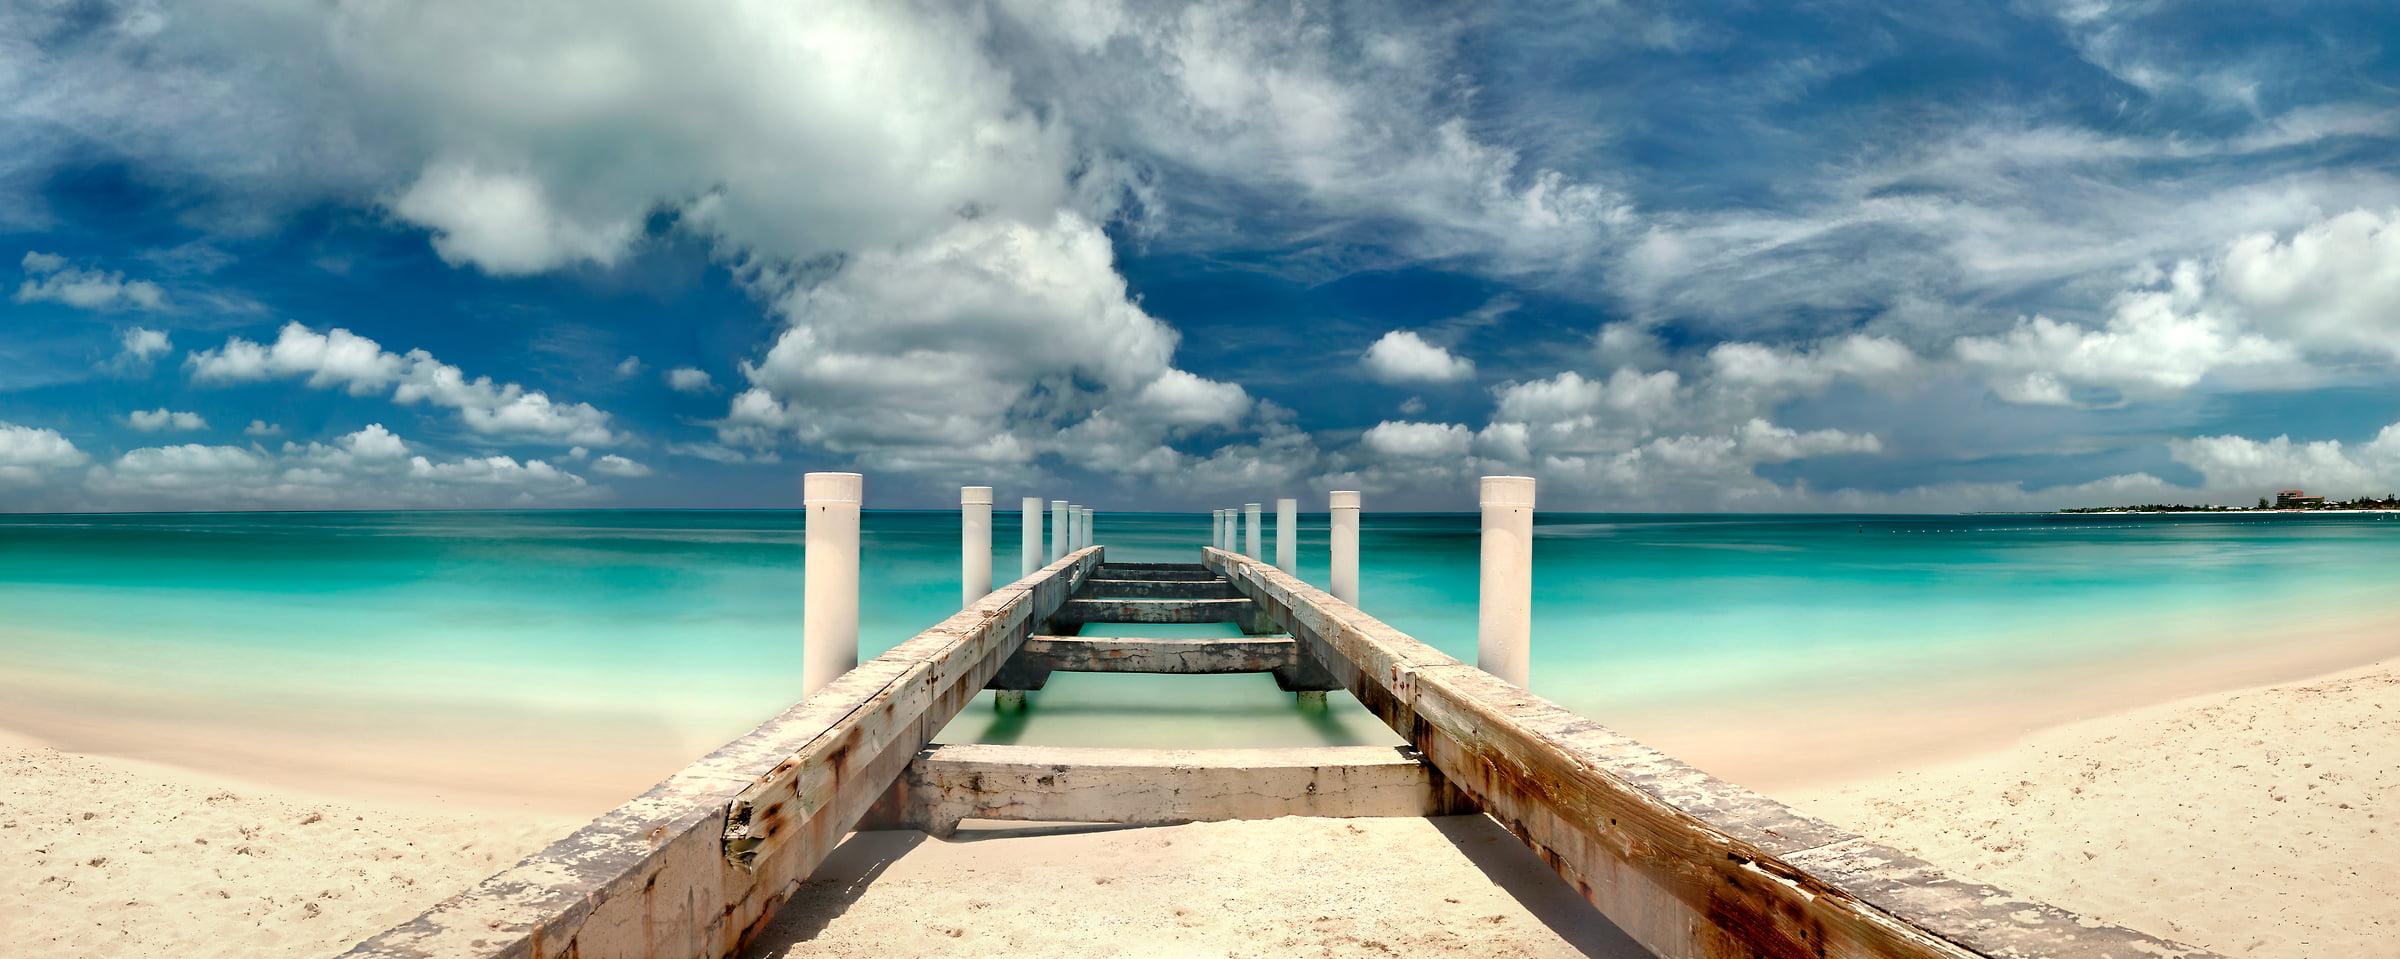 245 megapixels! A very high resolution photo of a beach and blue ocean with an old pier; VAST photo created by Phil Crawshay in Grace Bay, Turks and Caicos Islands.